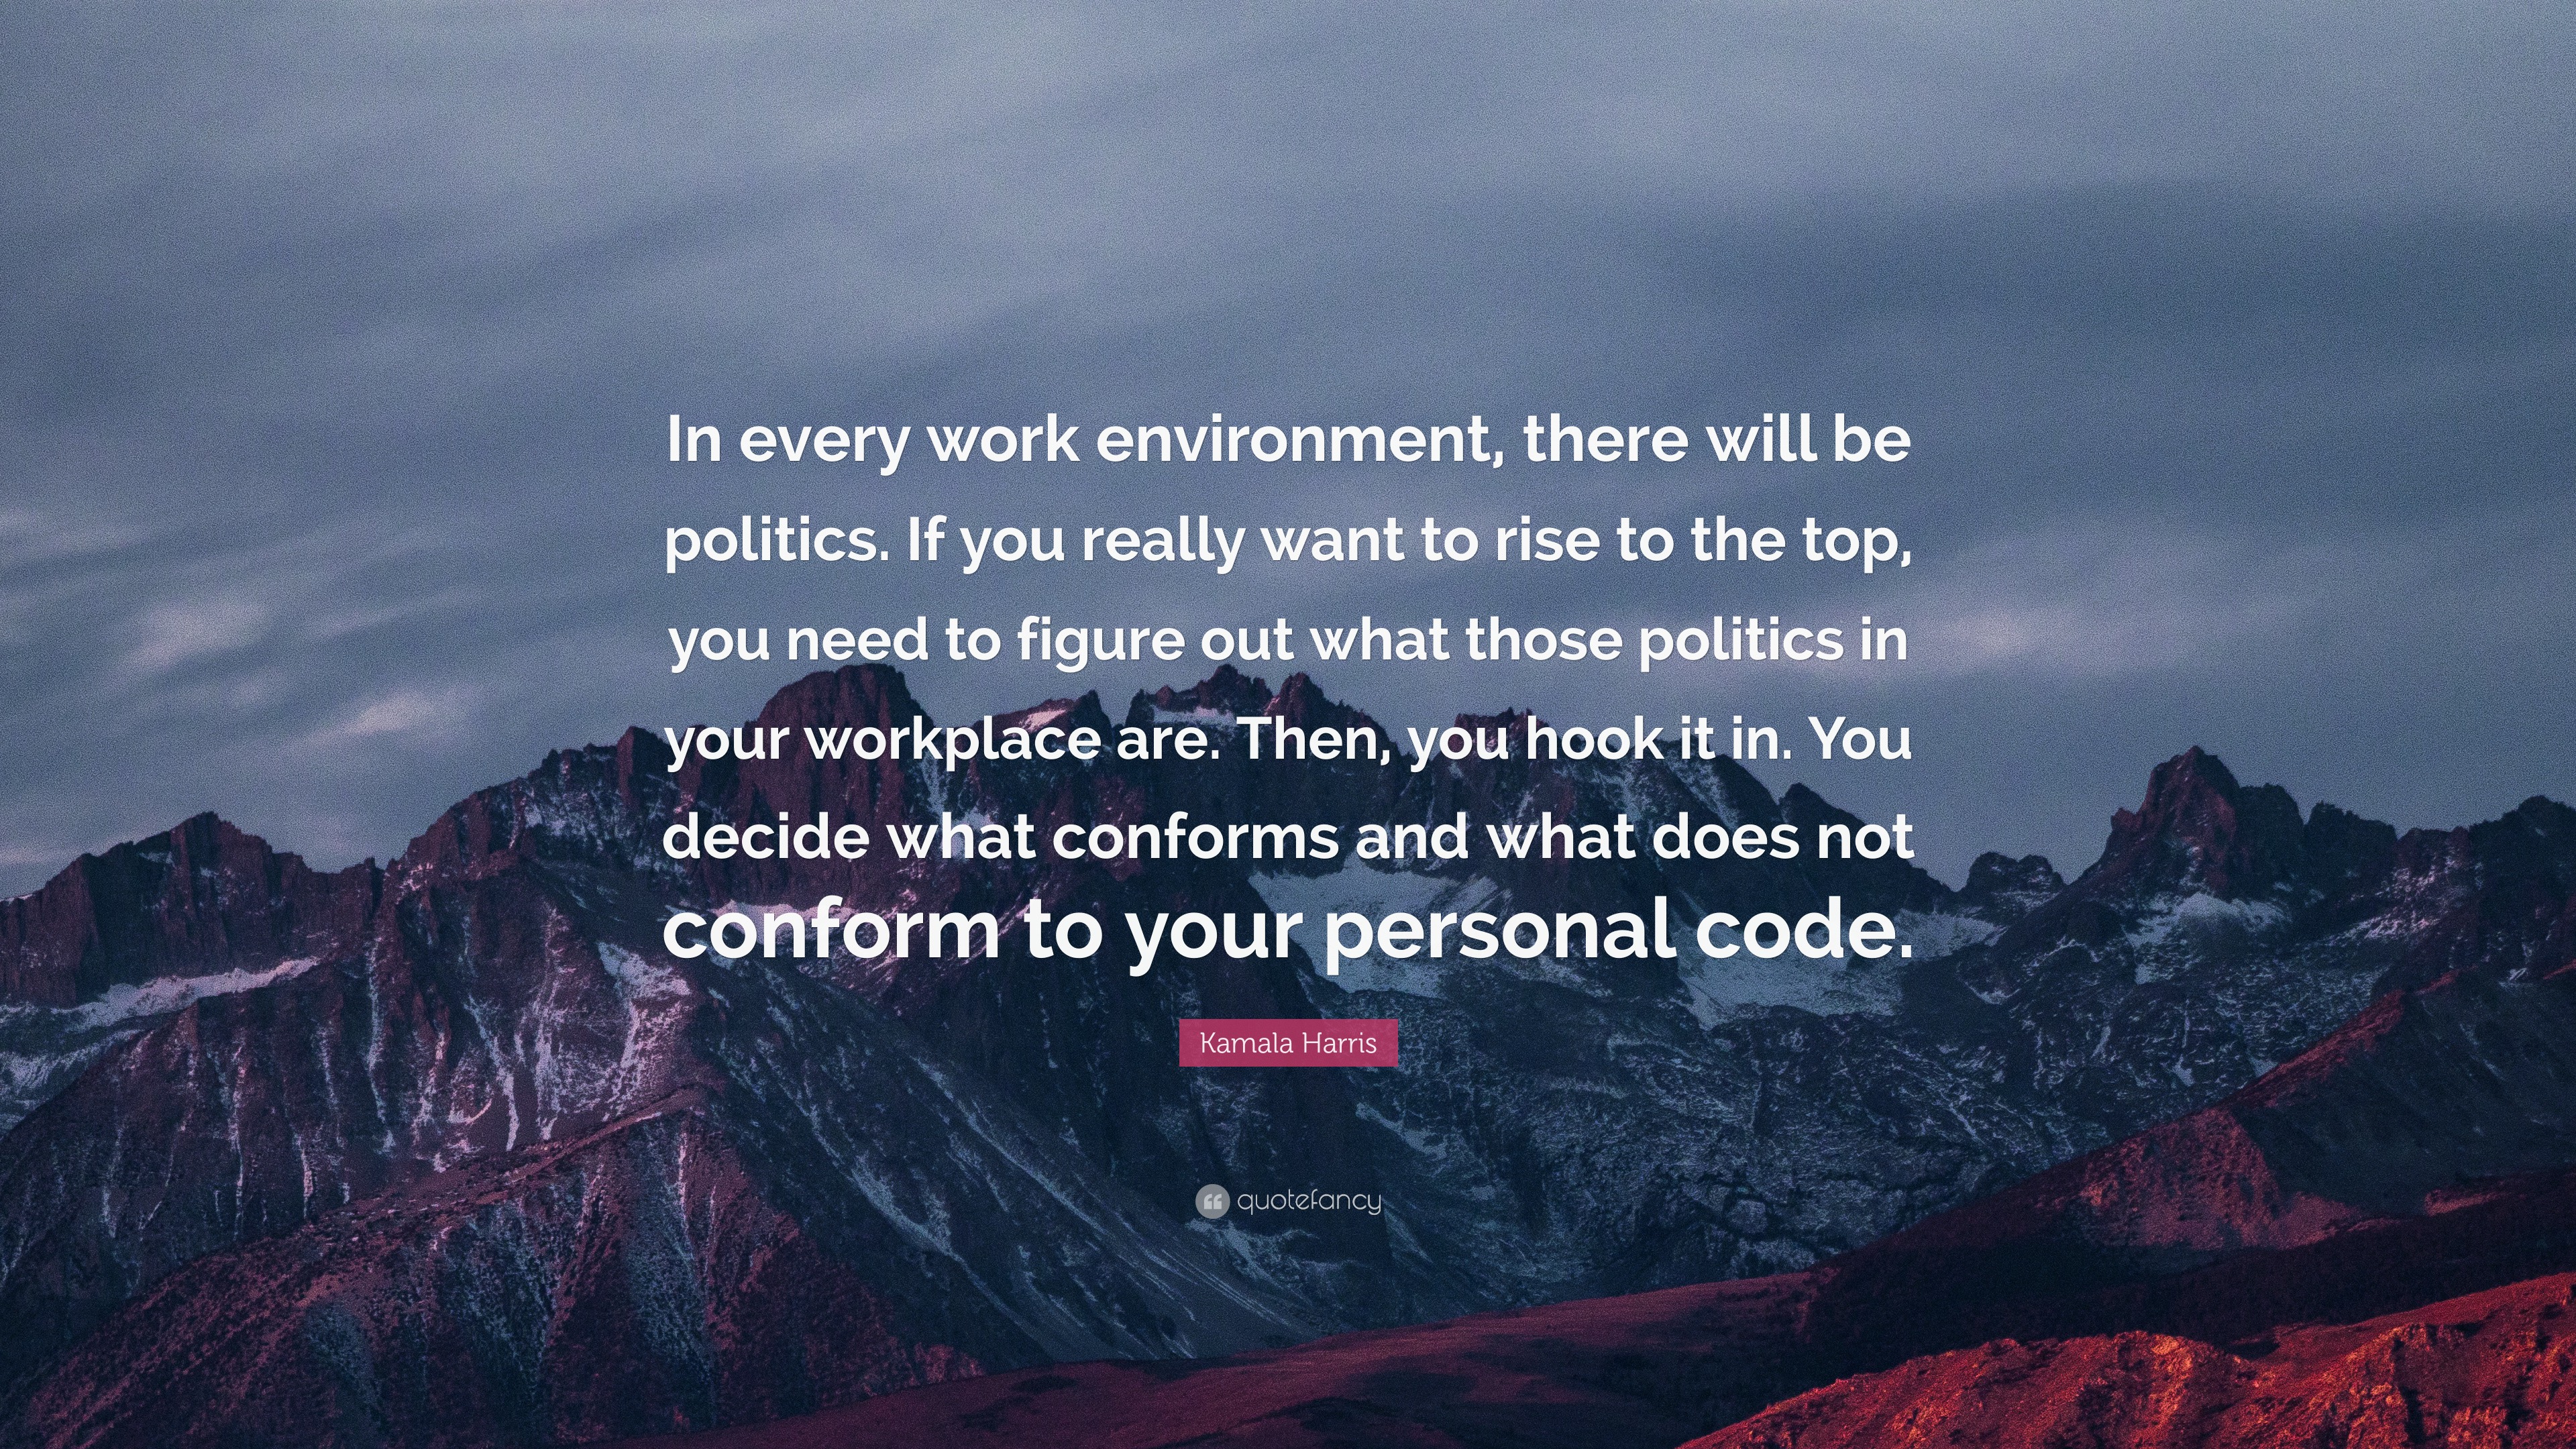 Kamala Harris Quote “In every work environment, there